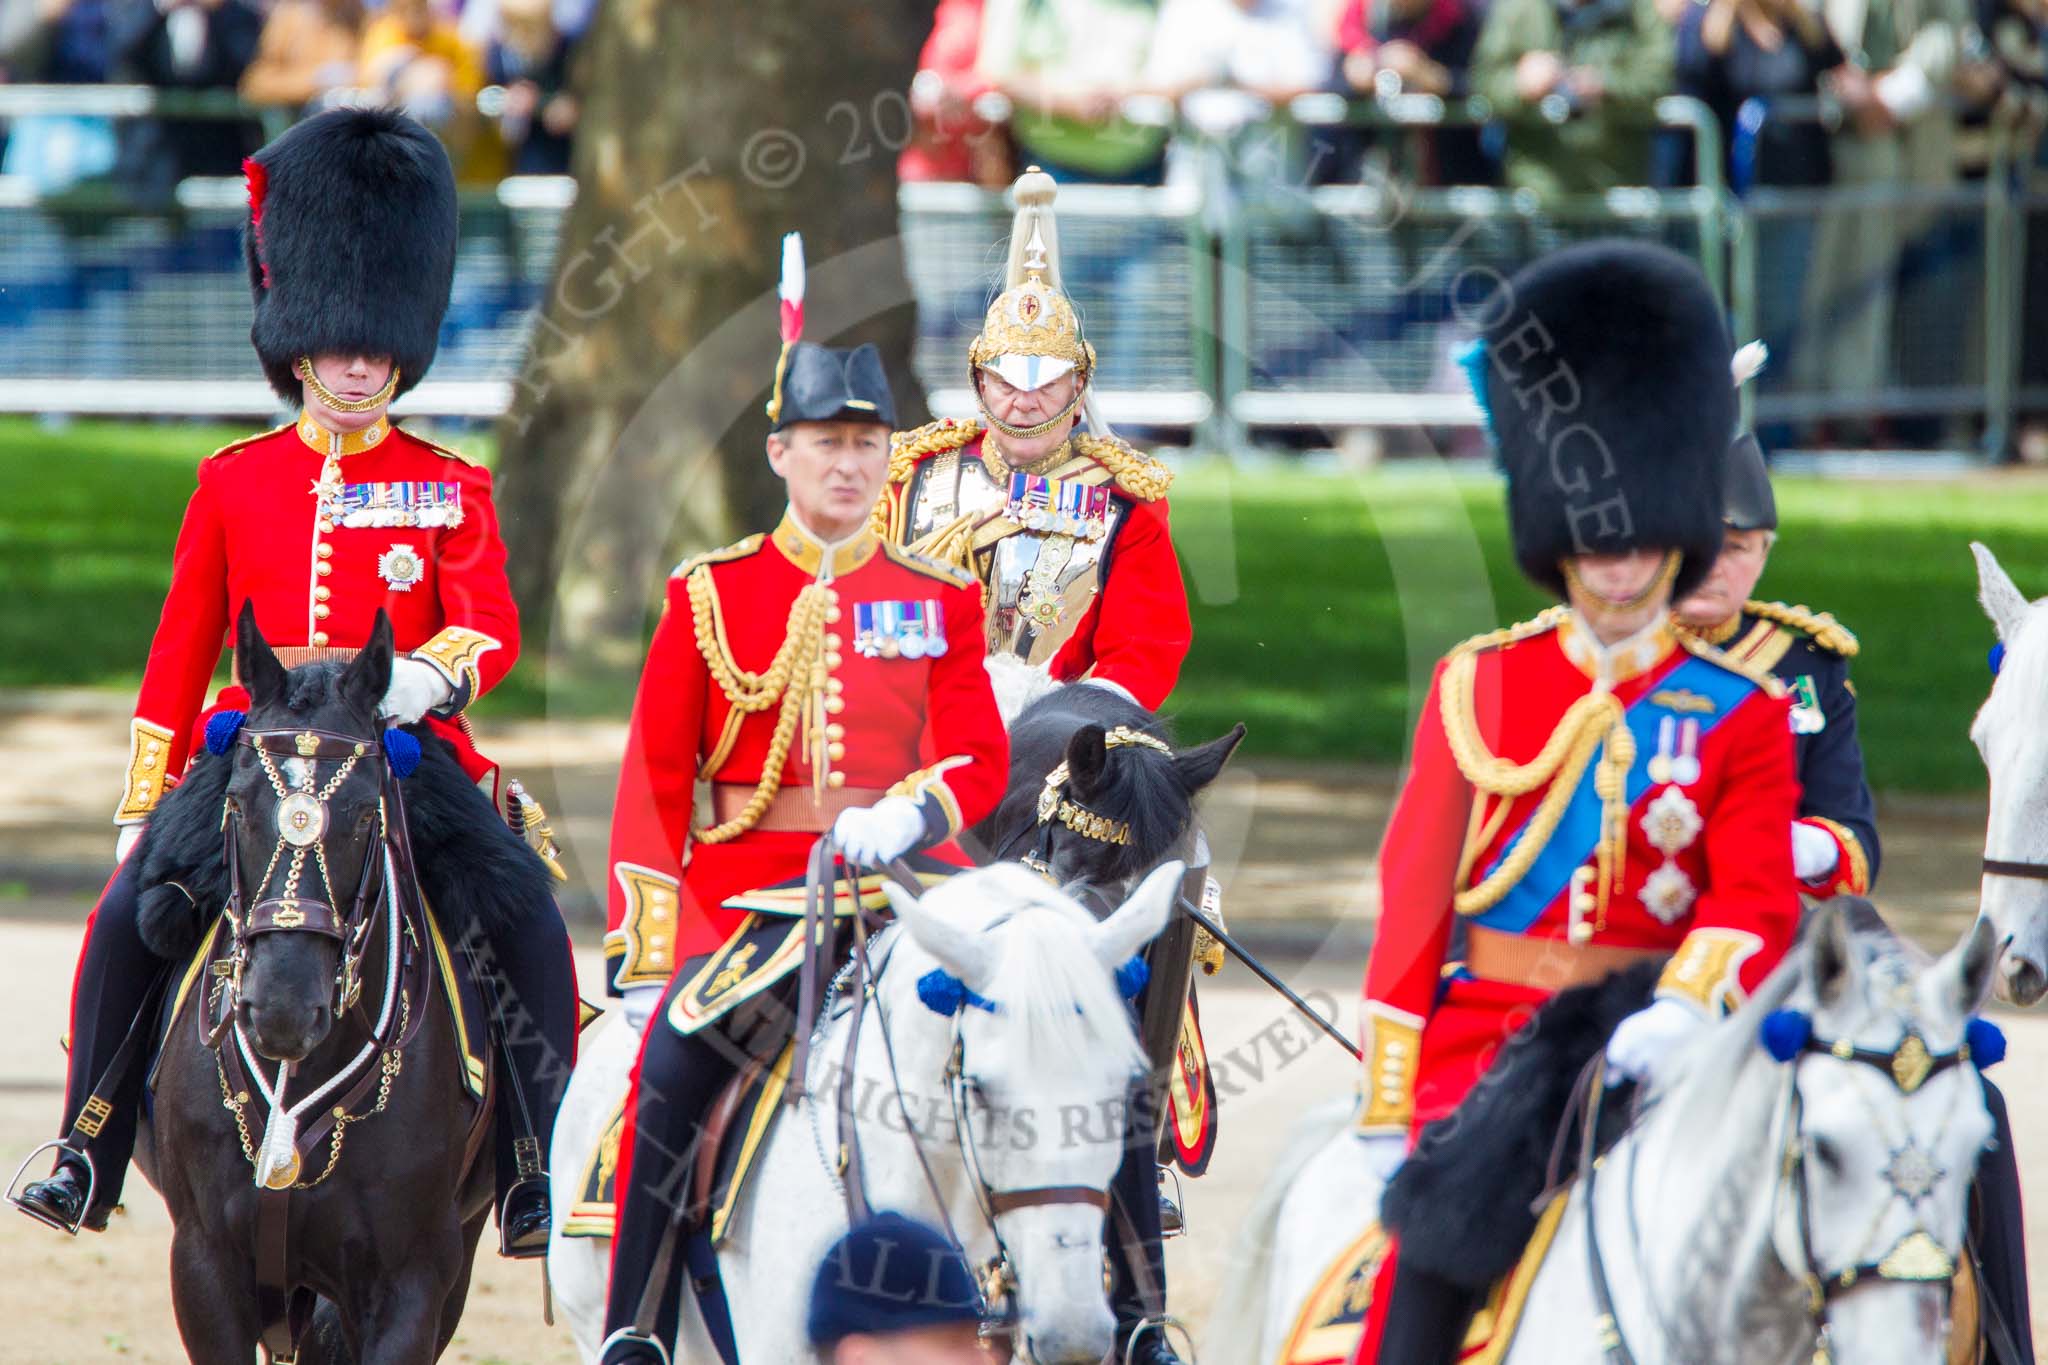 Trooping the Colour 2013: The Non-Royal Colonels, Colonel Coldstream Guards General Sir James Bucknall and Gold Stick in Waiting and Colonel Life Guards, Field Marshal the Lord Guthrie of Craigiebank, in focus behind the Crown Equerries and The Duke of Cambridge..
Horse Guards Parade, Westminster,
London SW1,

United Kingdom,
on 15 June 2013 at 11:06, image #366